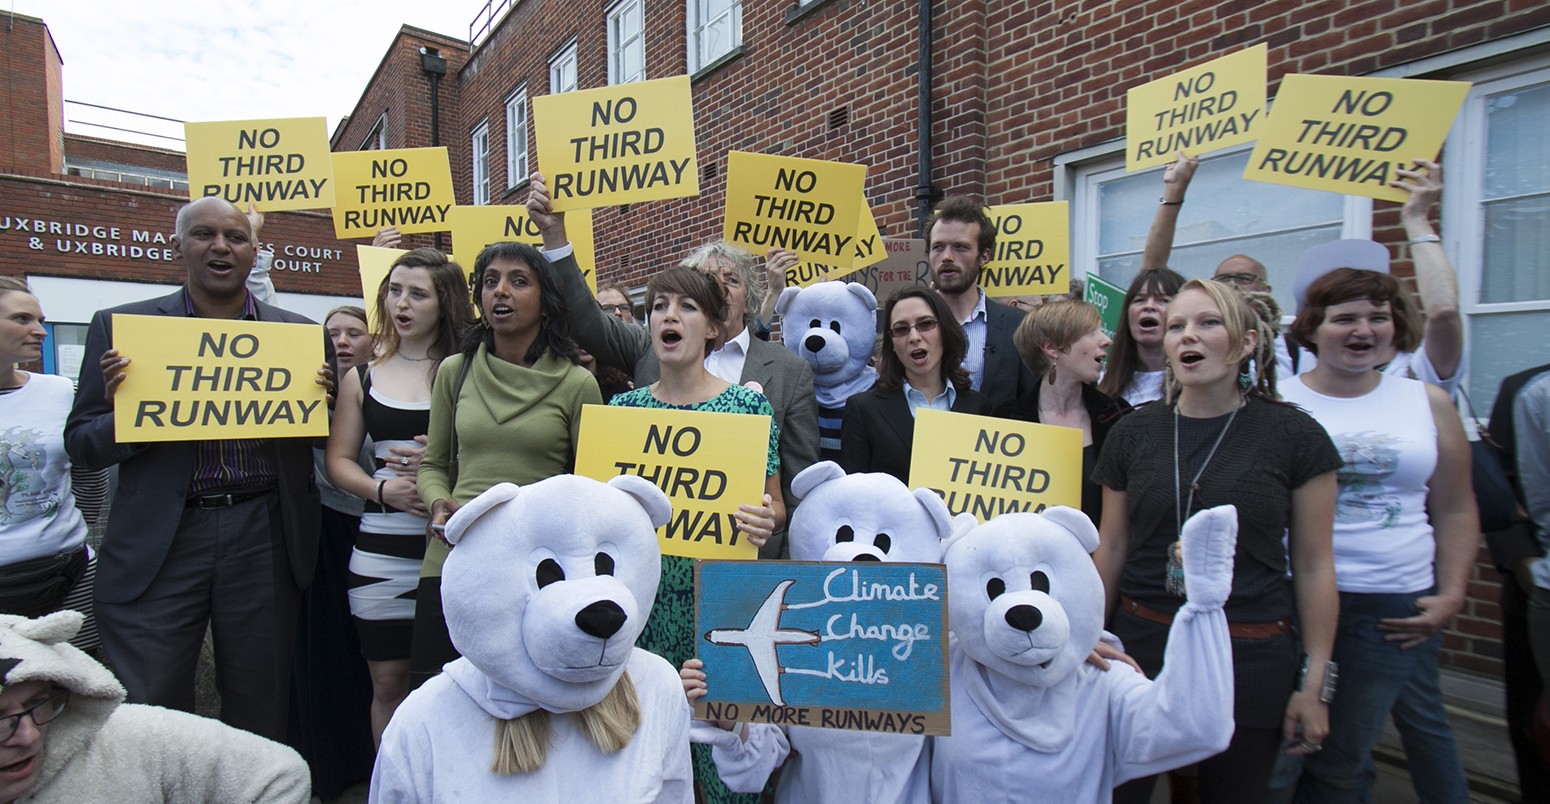 Plane Stupid activists and supporters wave placards in opposition to a third runway at Heathrow airport outside Uxbridge Magistrates courting West London. -- Plane Stupid climate change activists who oppose a third runway at Heathrow airport appear with their supporters dressed in Bunny rabbits at Uxbridge magistrates court.